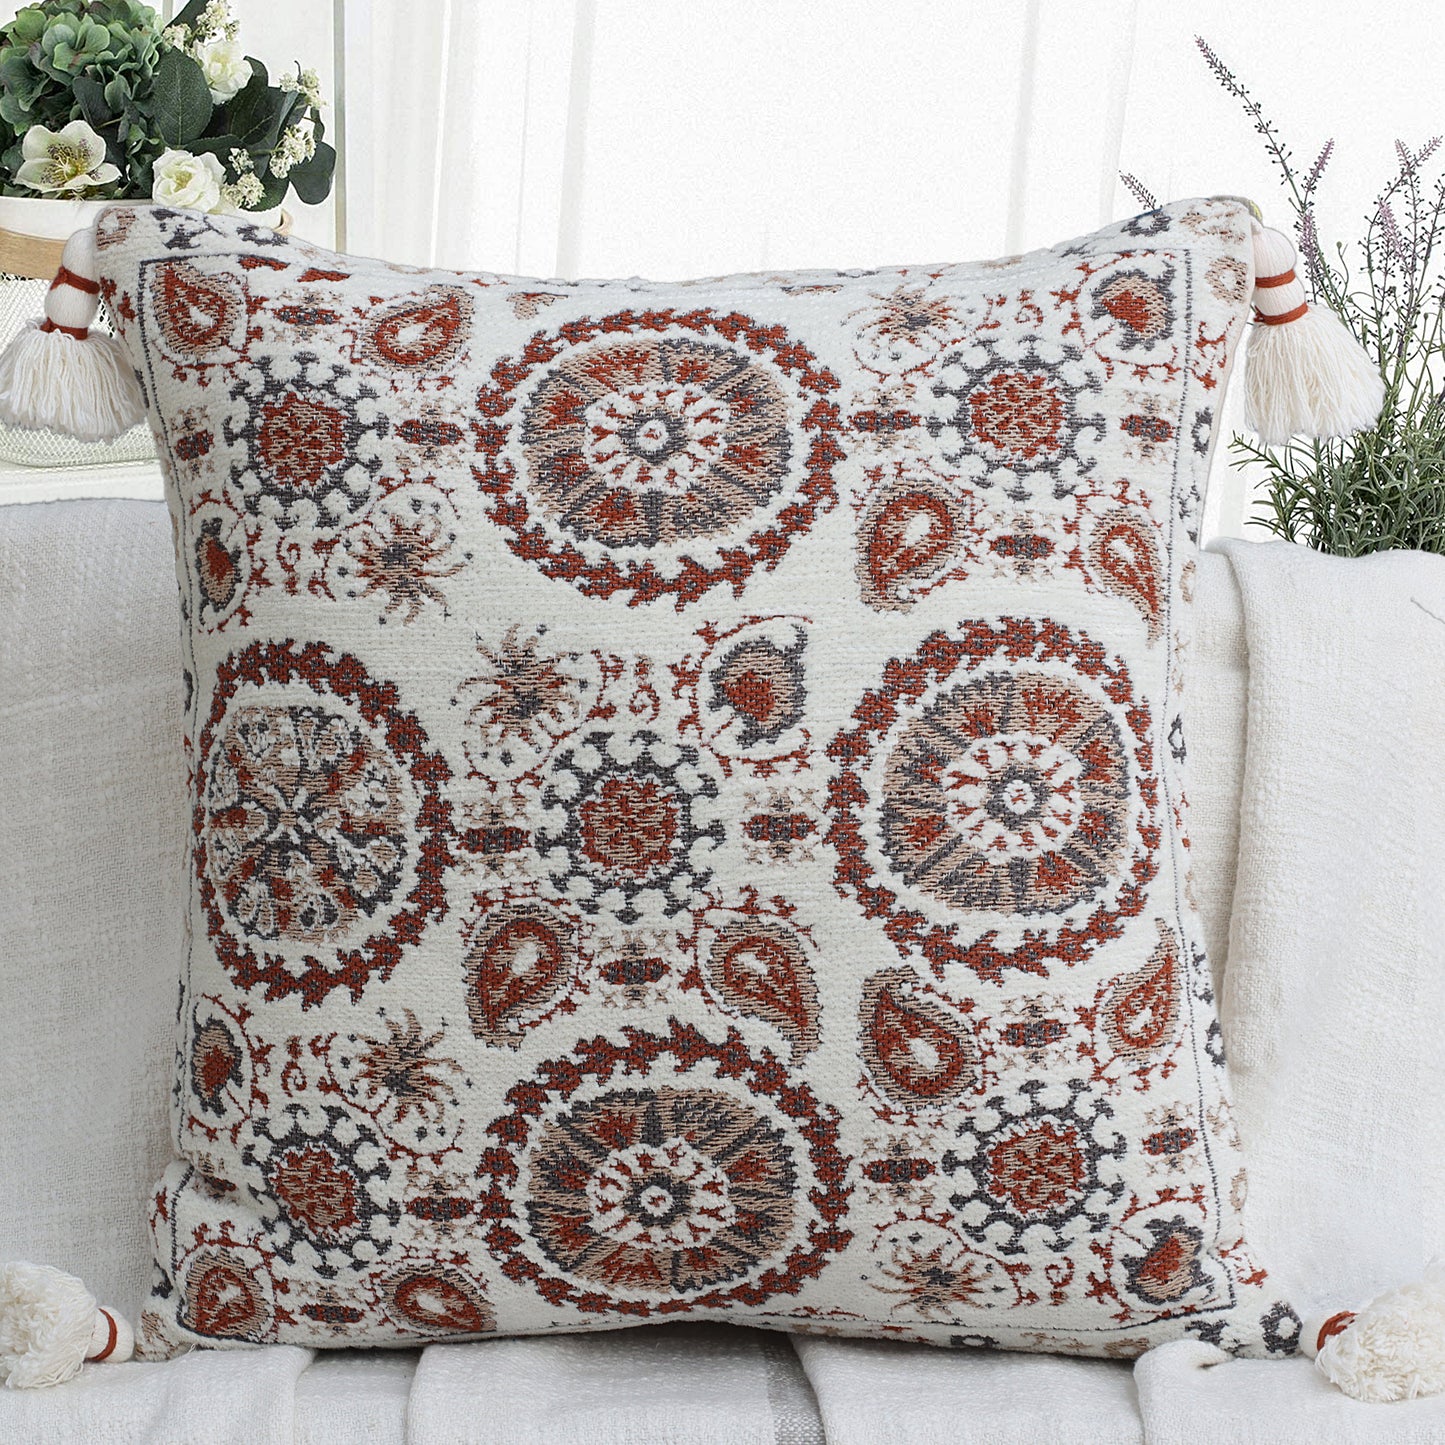 White Jacquard Cushion Cover With Tassels